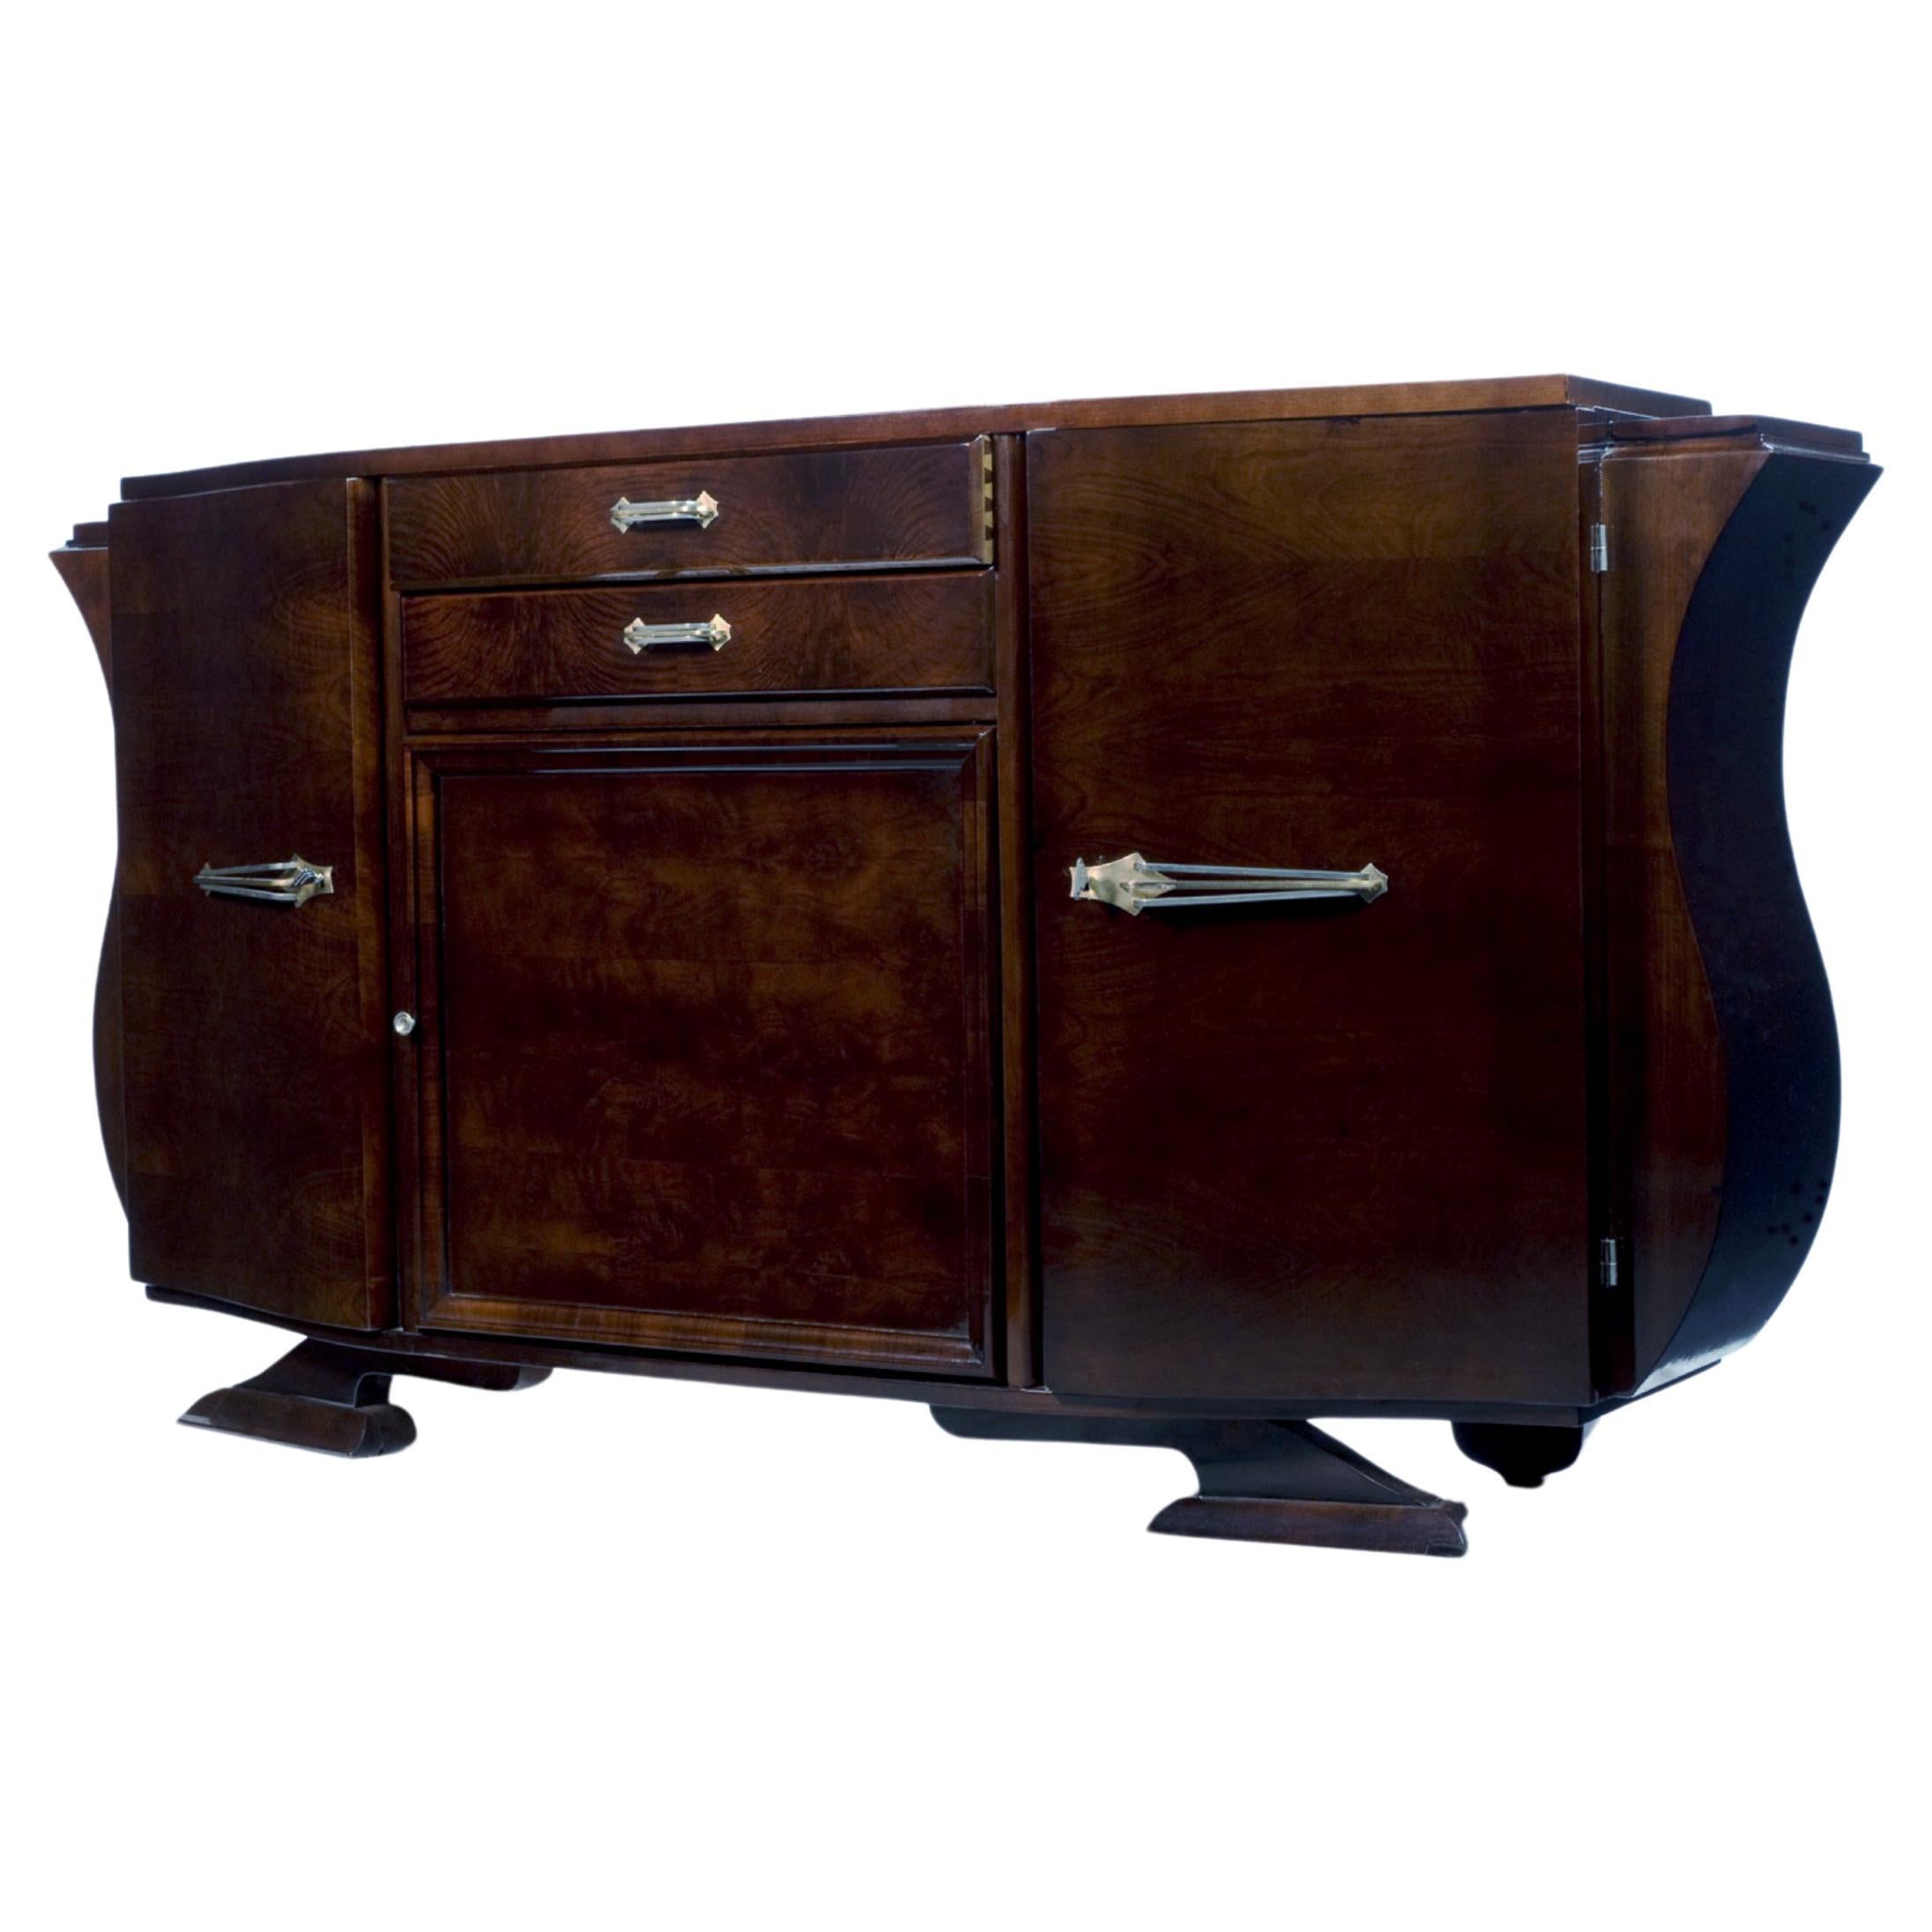 An exceptional and sophisticated sideboard, showcasing exquisite craftsmanship and sleek chromed hardware. This extraordinary piece, created during the first half of the 20th century, boasts two upper drawers and an internal partition with two